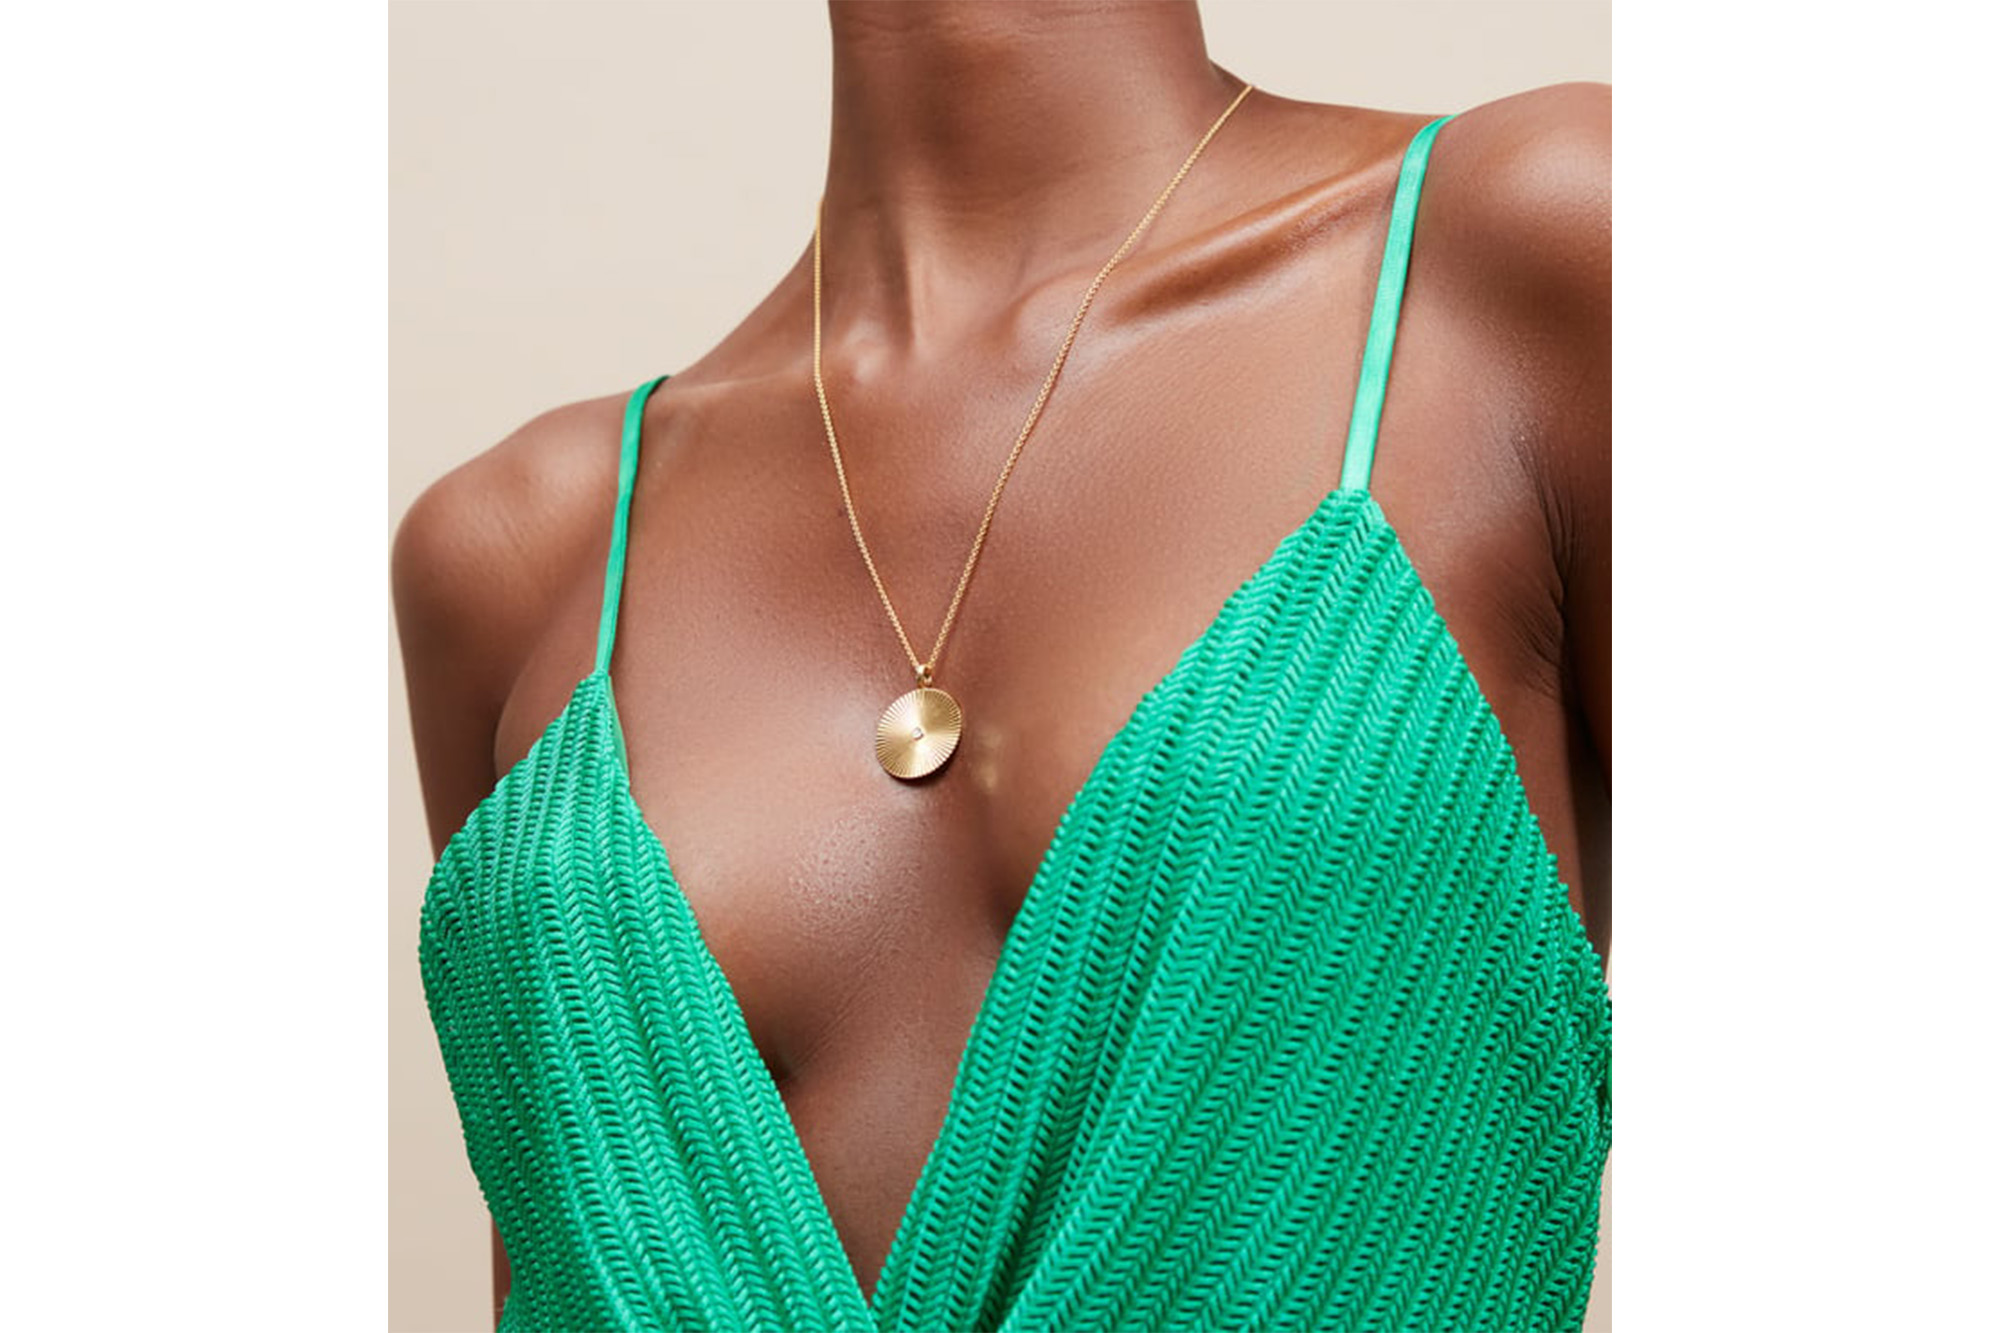 A model with a gold necklace